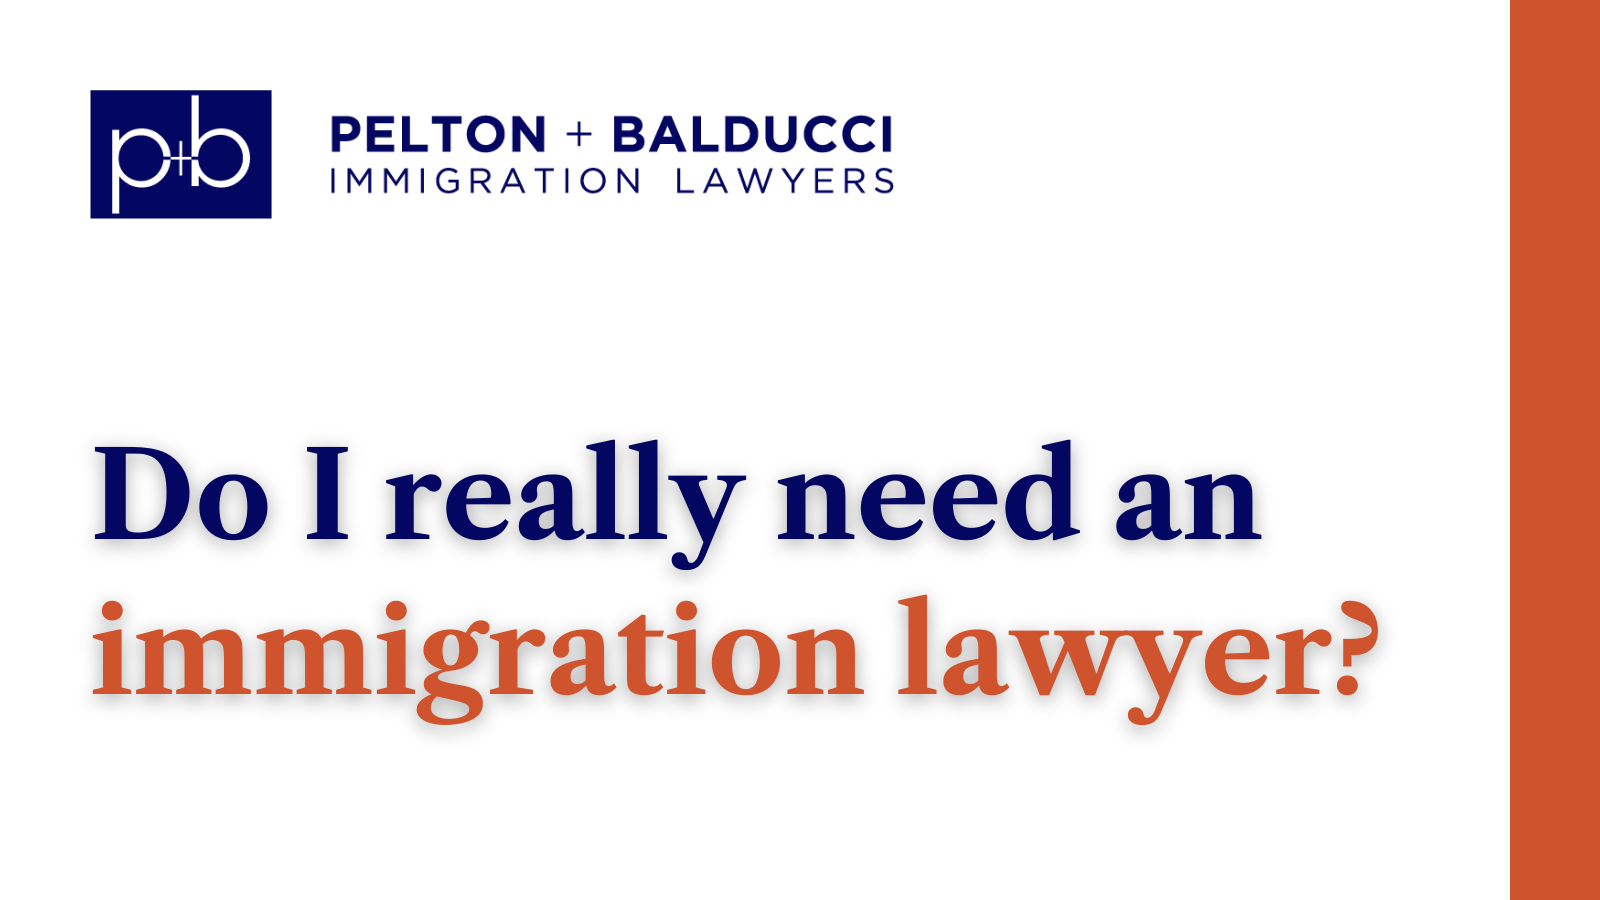 Do I really need an immigration lawyer - New Orleans Immigration Lawyers - Pelton Balducci